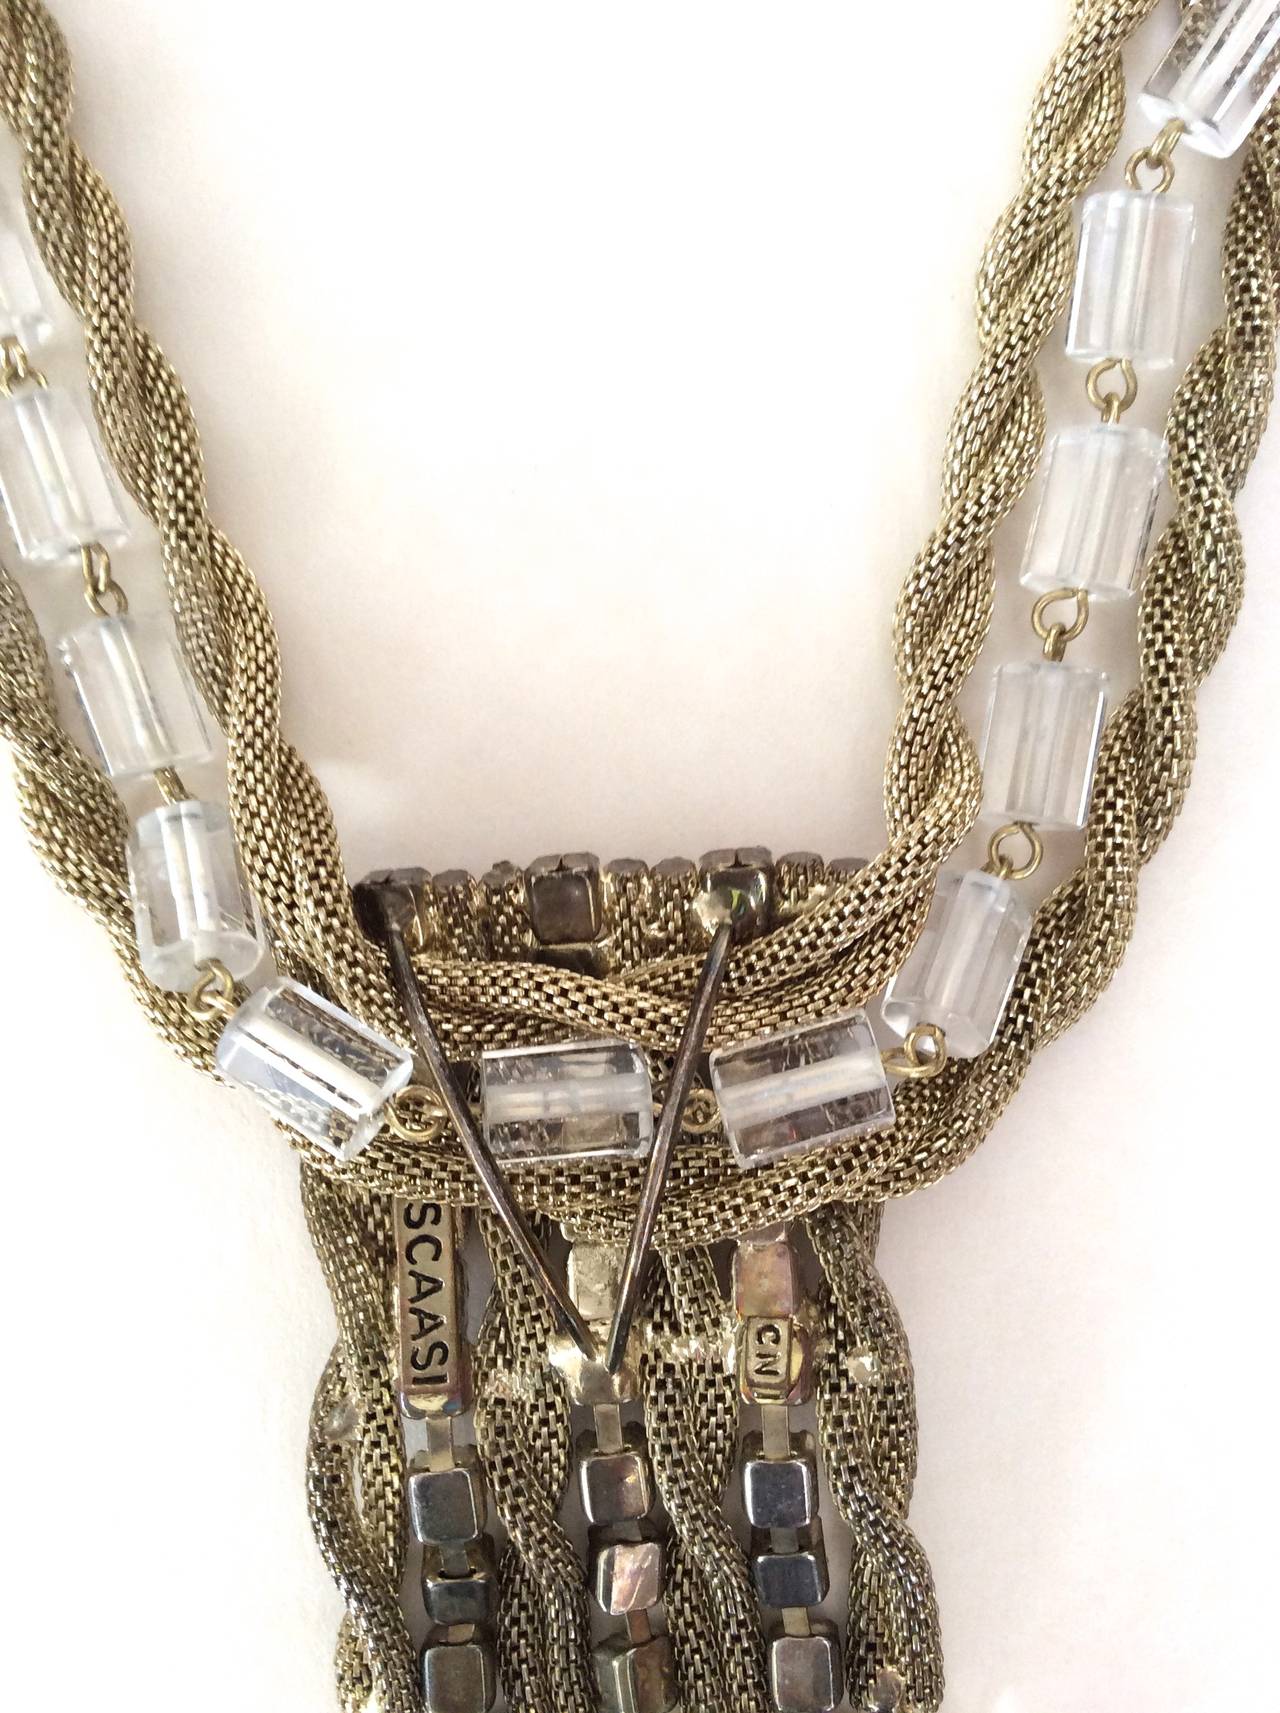 Women's Scassi Necklace with Matching Earrings - Extremely Rare For Sale